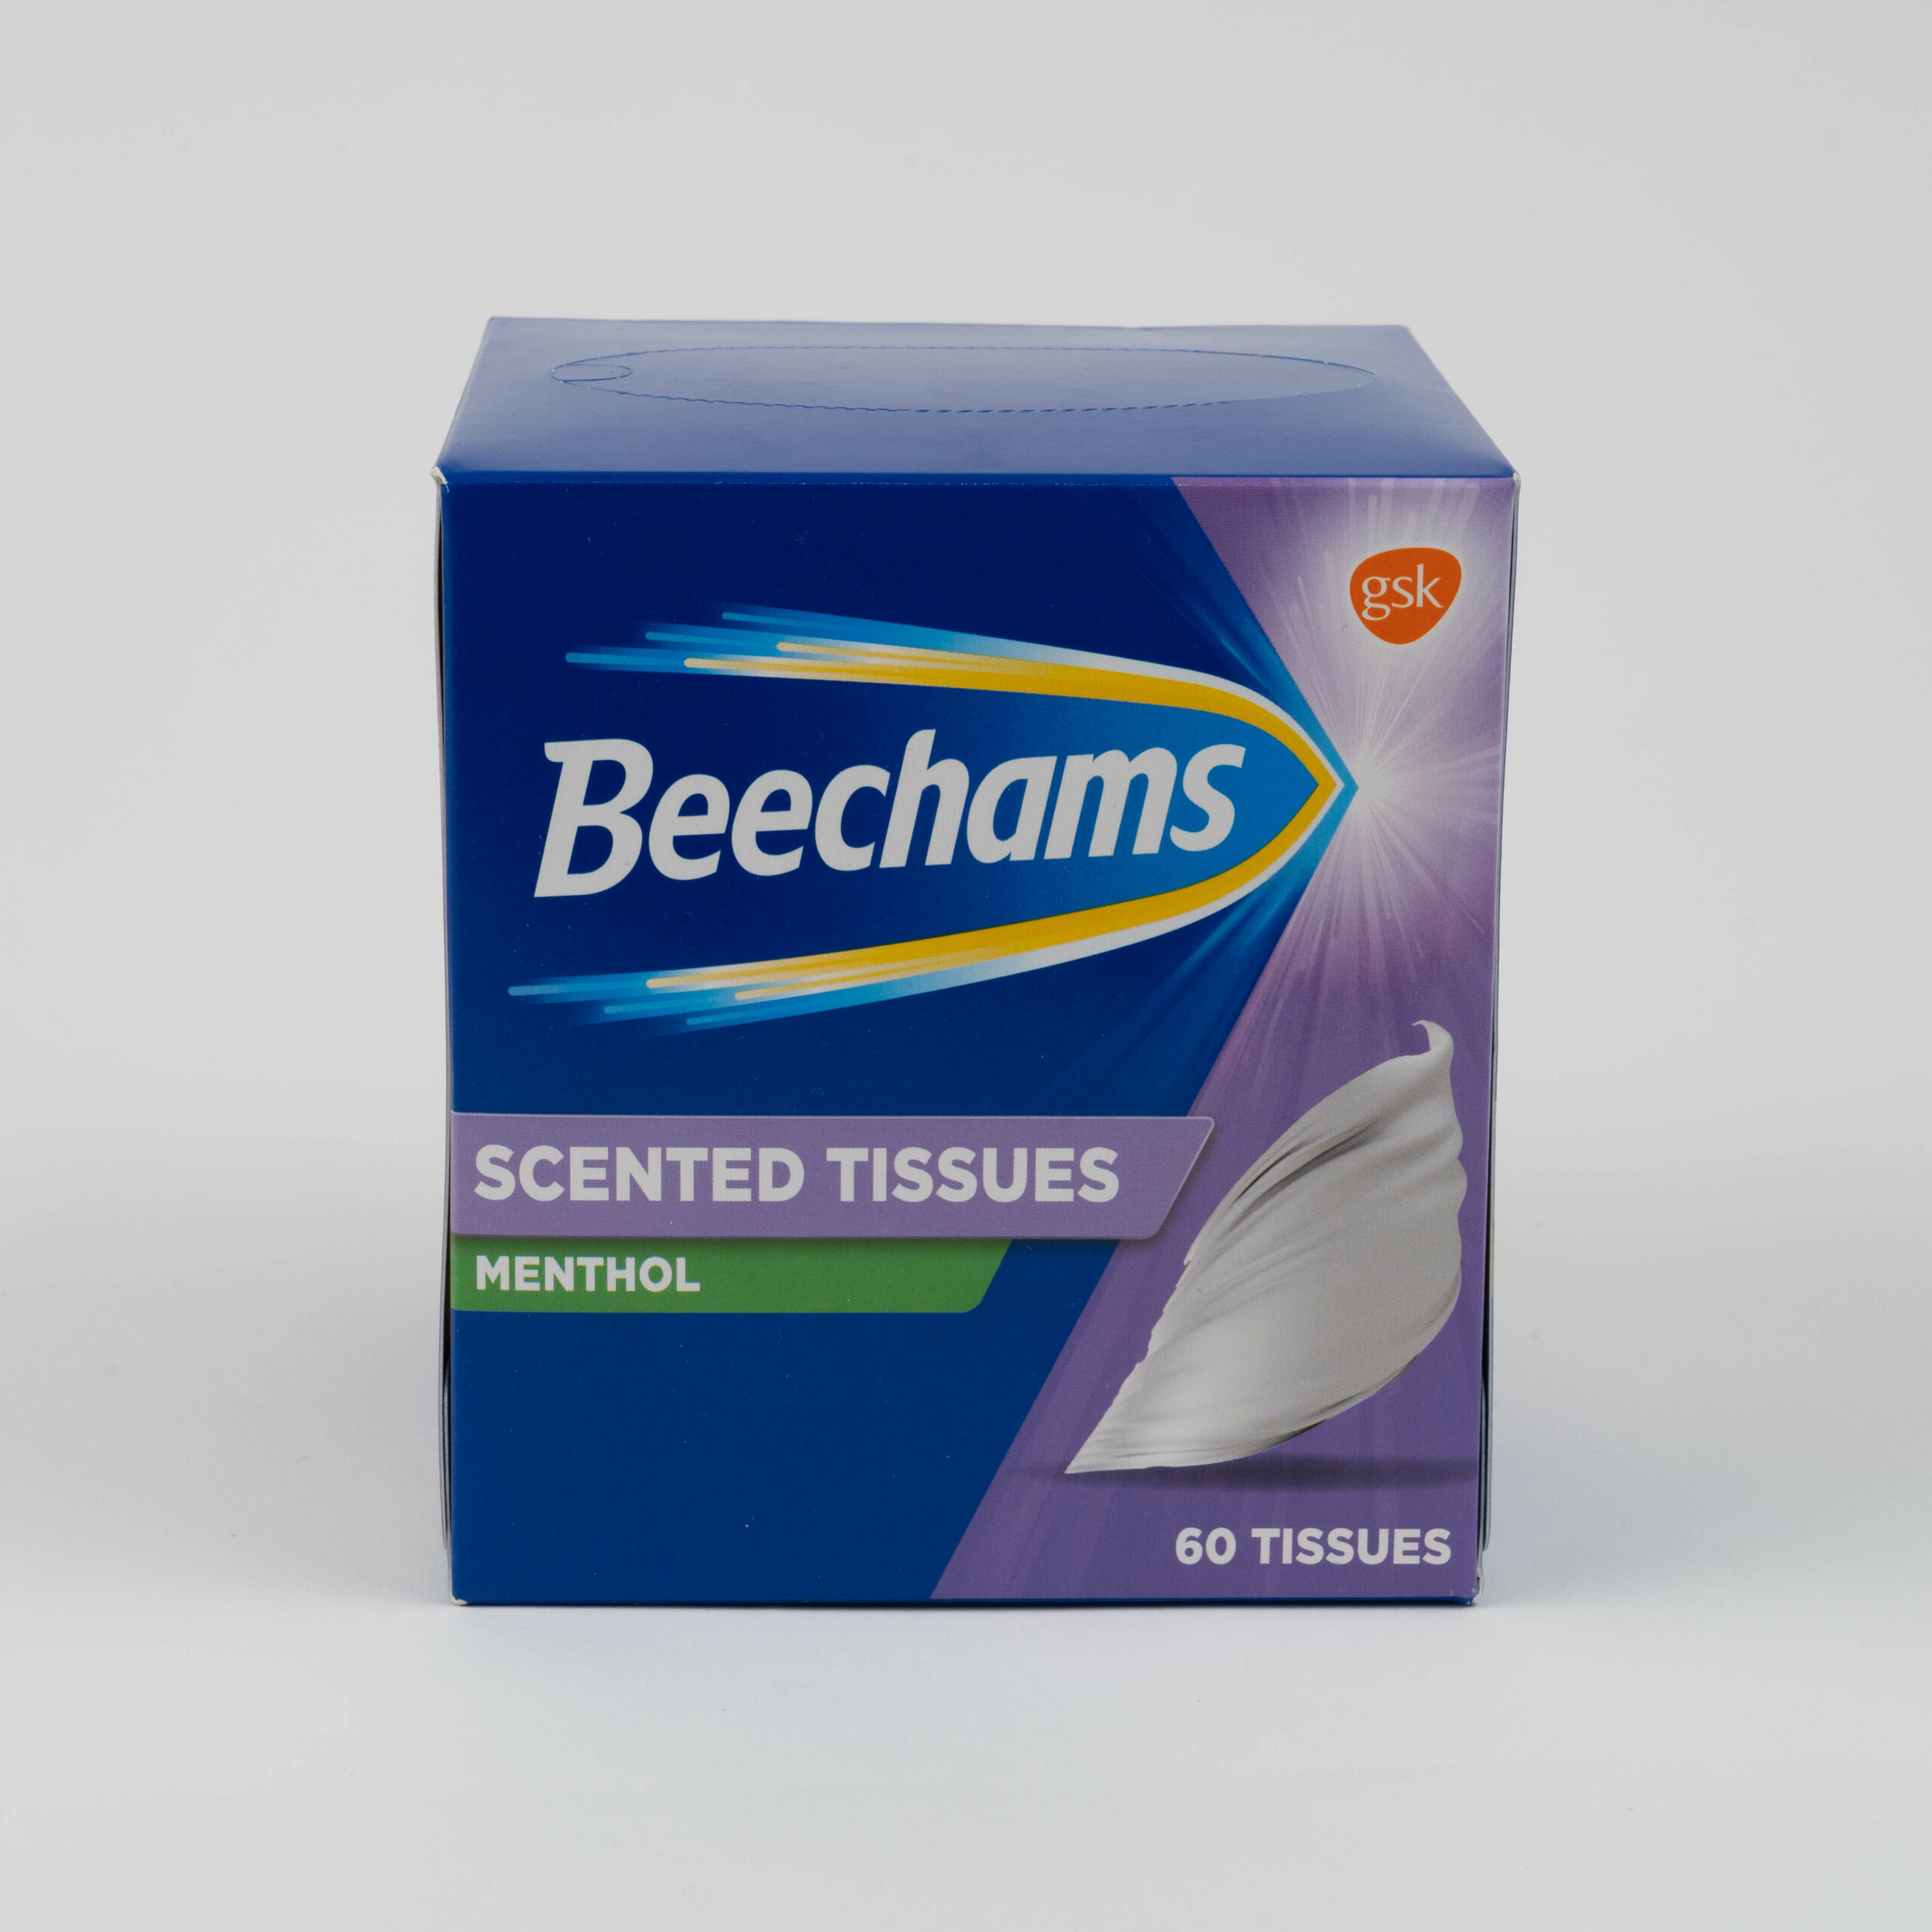 Beecham’s Scented Tissues-Boxed pack 60 tissues.